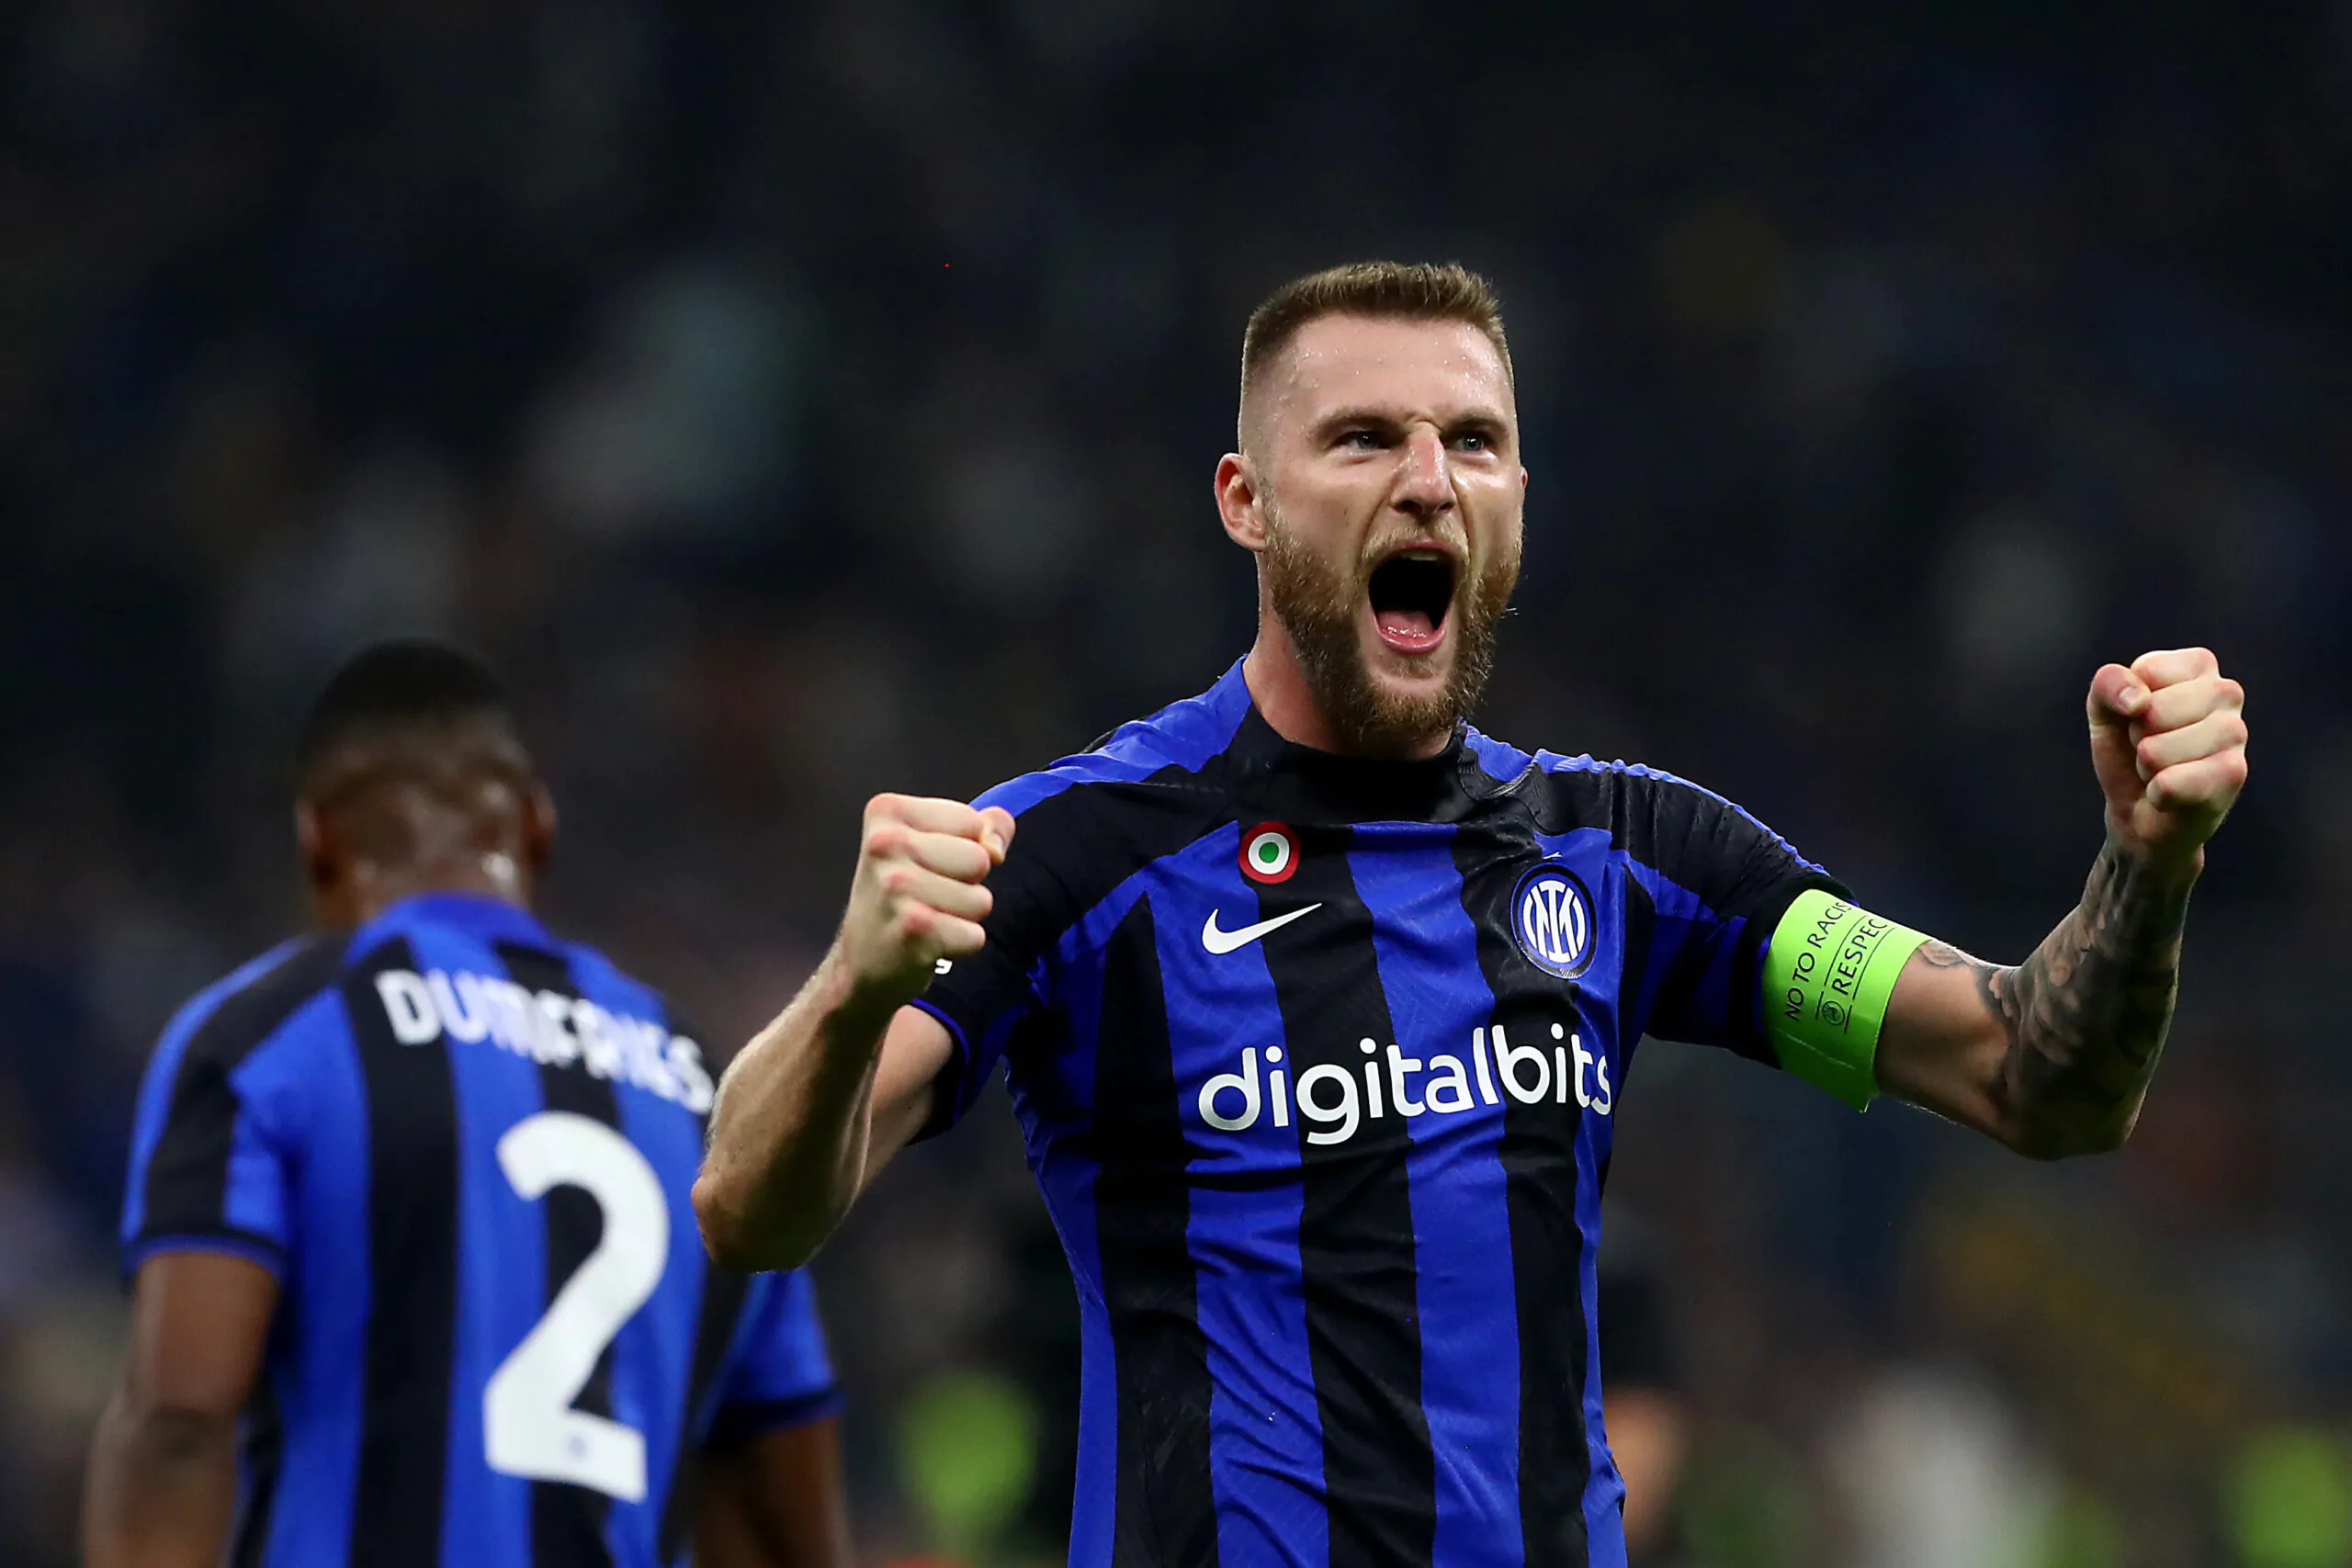 Skriniar has seemingly ended his Inter career in premature manner, after the center-back was forced to undergo a spinal surgery due to problems in his back.